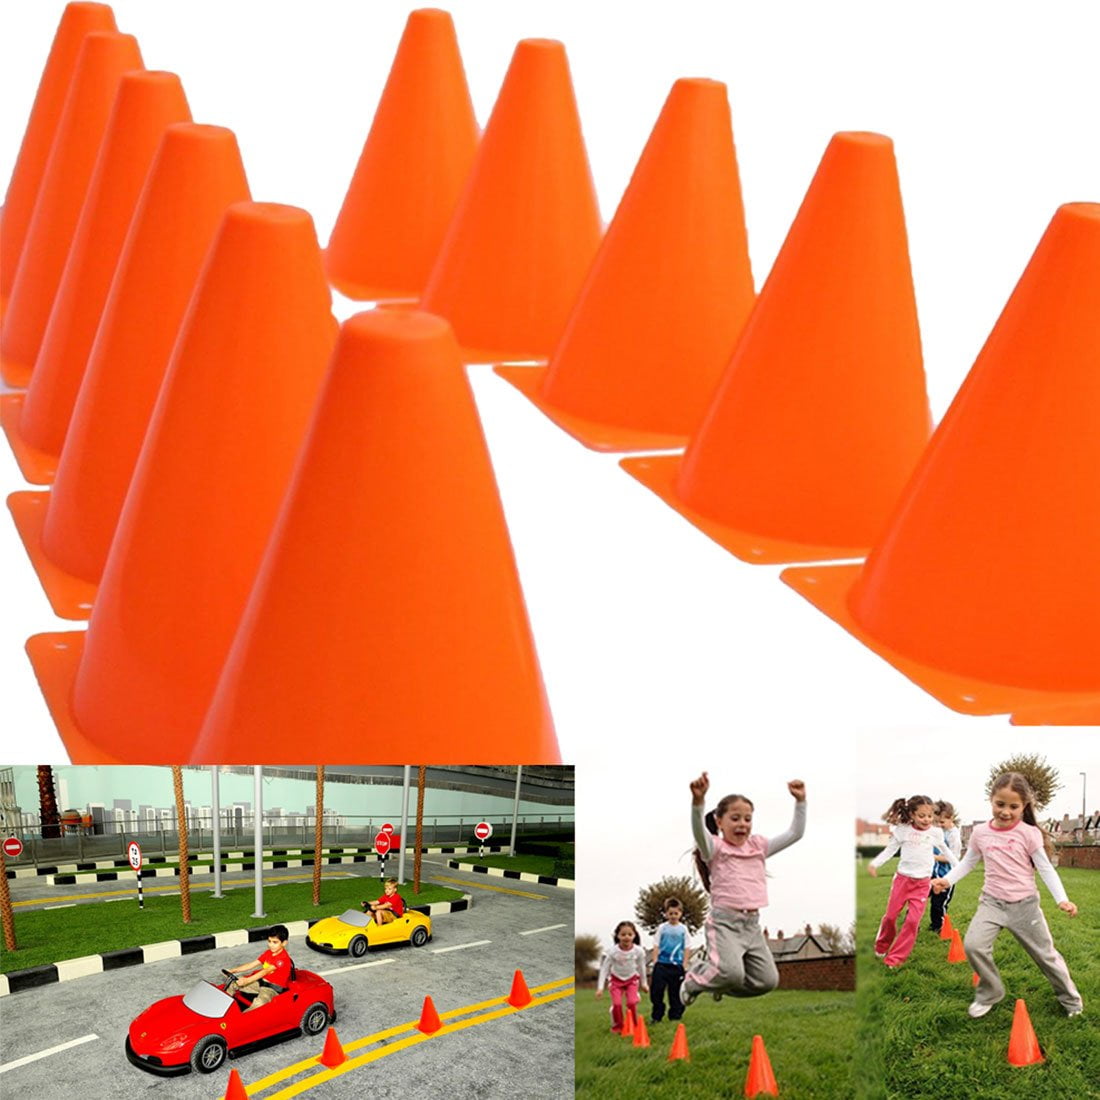 12 Pack 7 Inch Plastic Sport Training Traffic Cone for Kids Home Football M1P2 